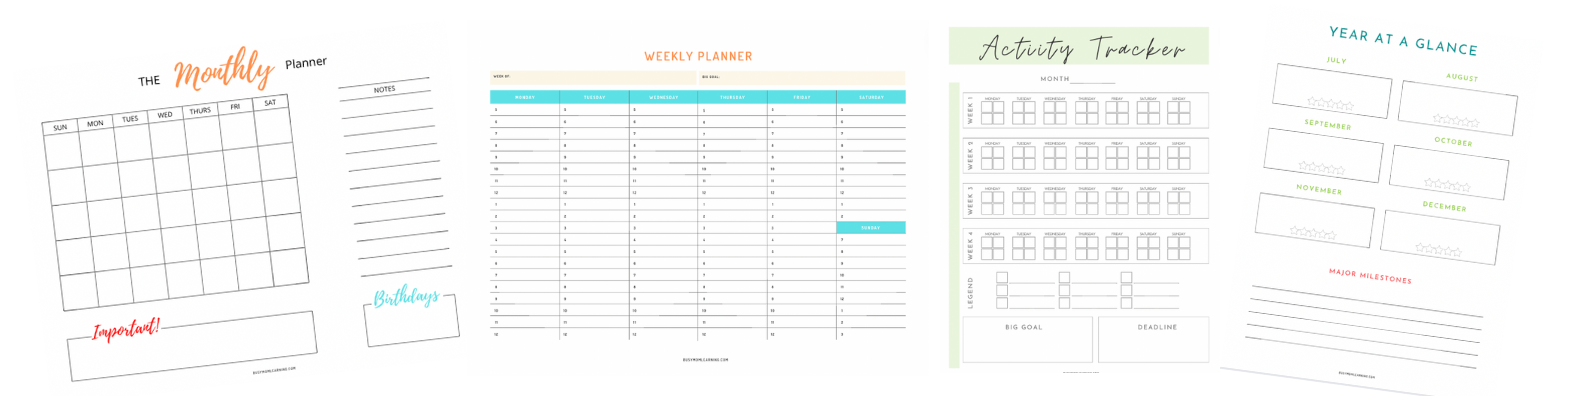 printables - planners